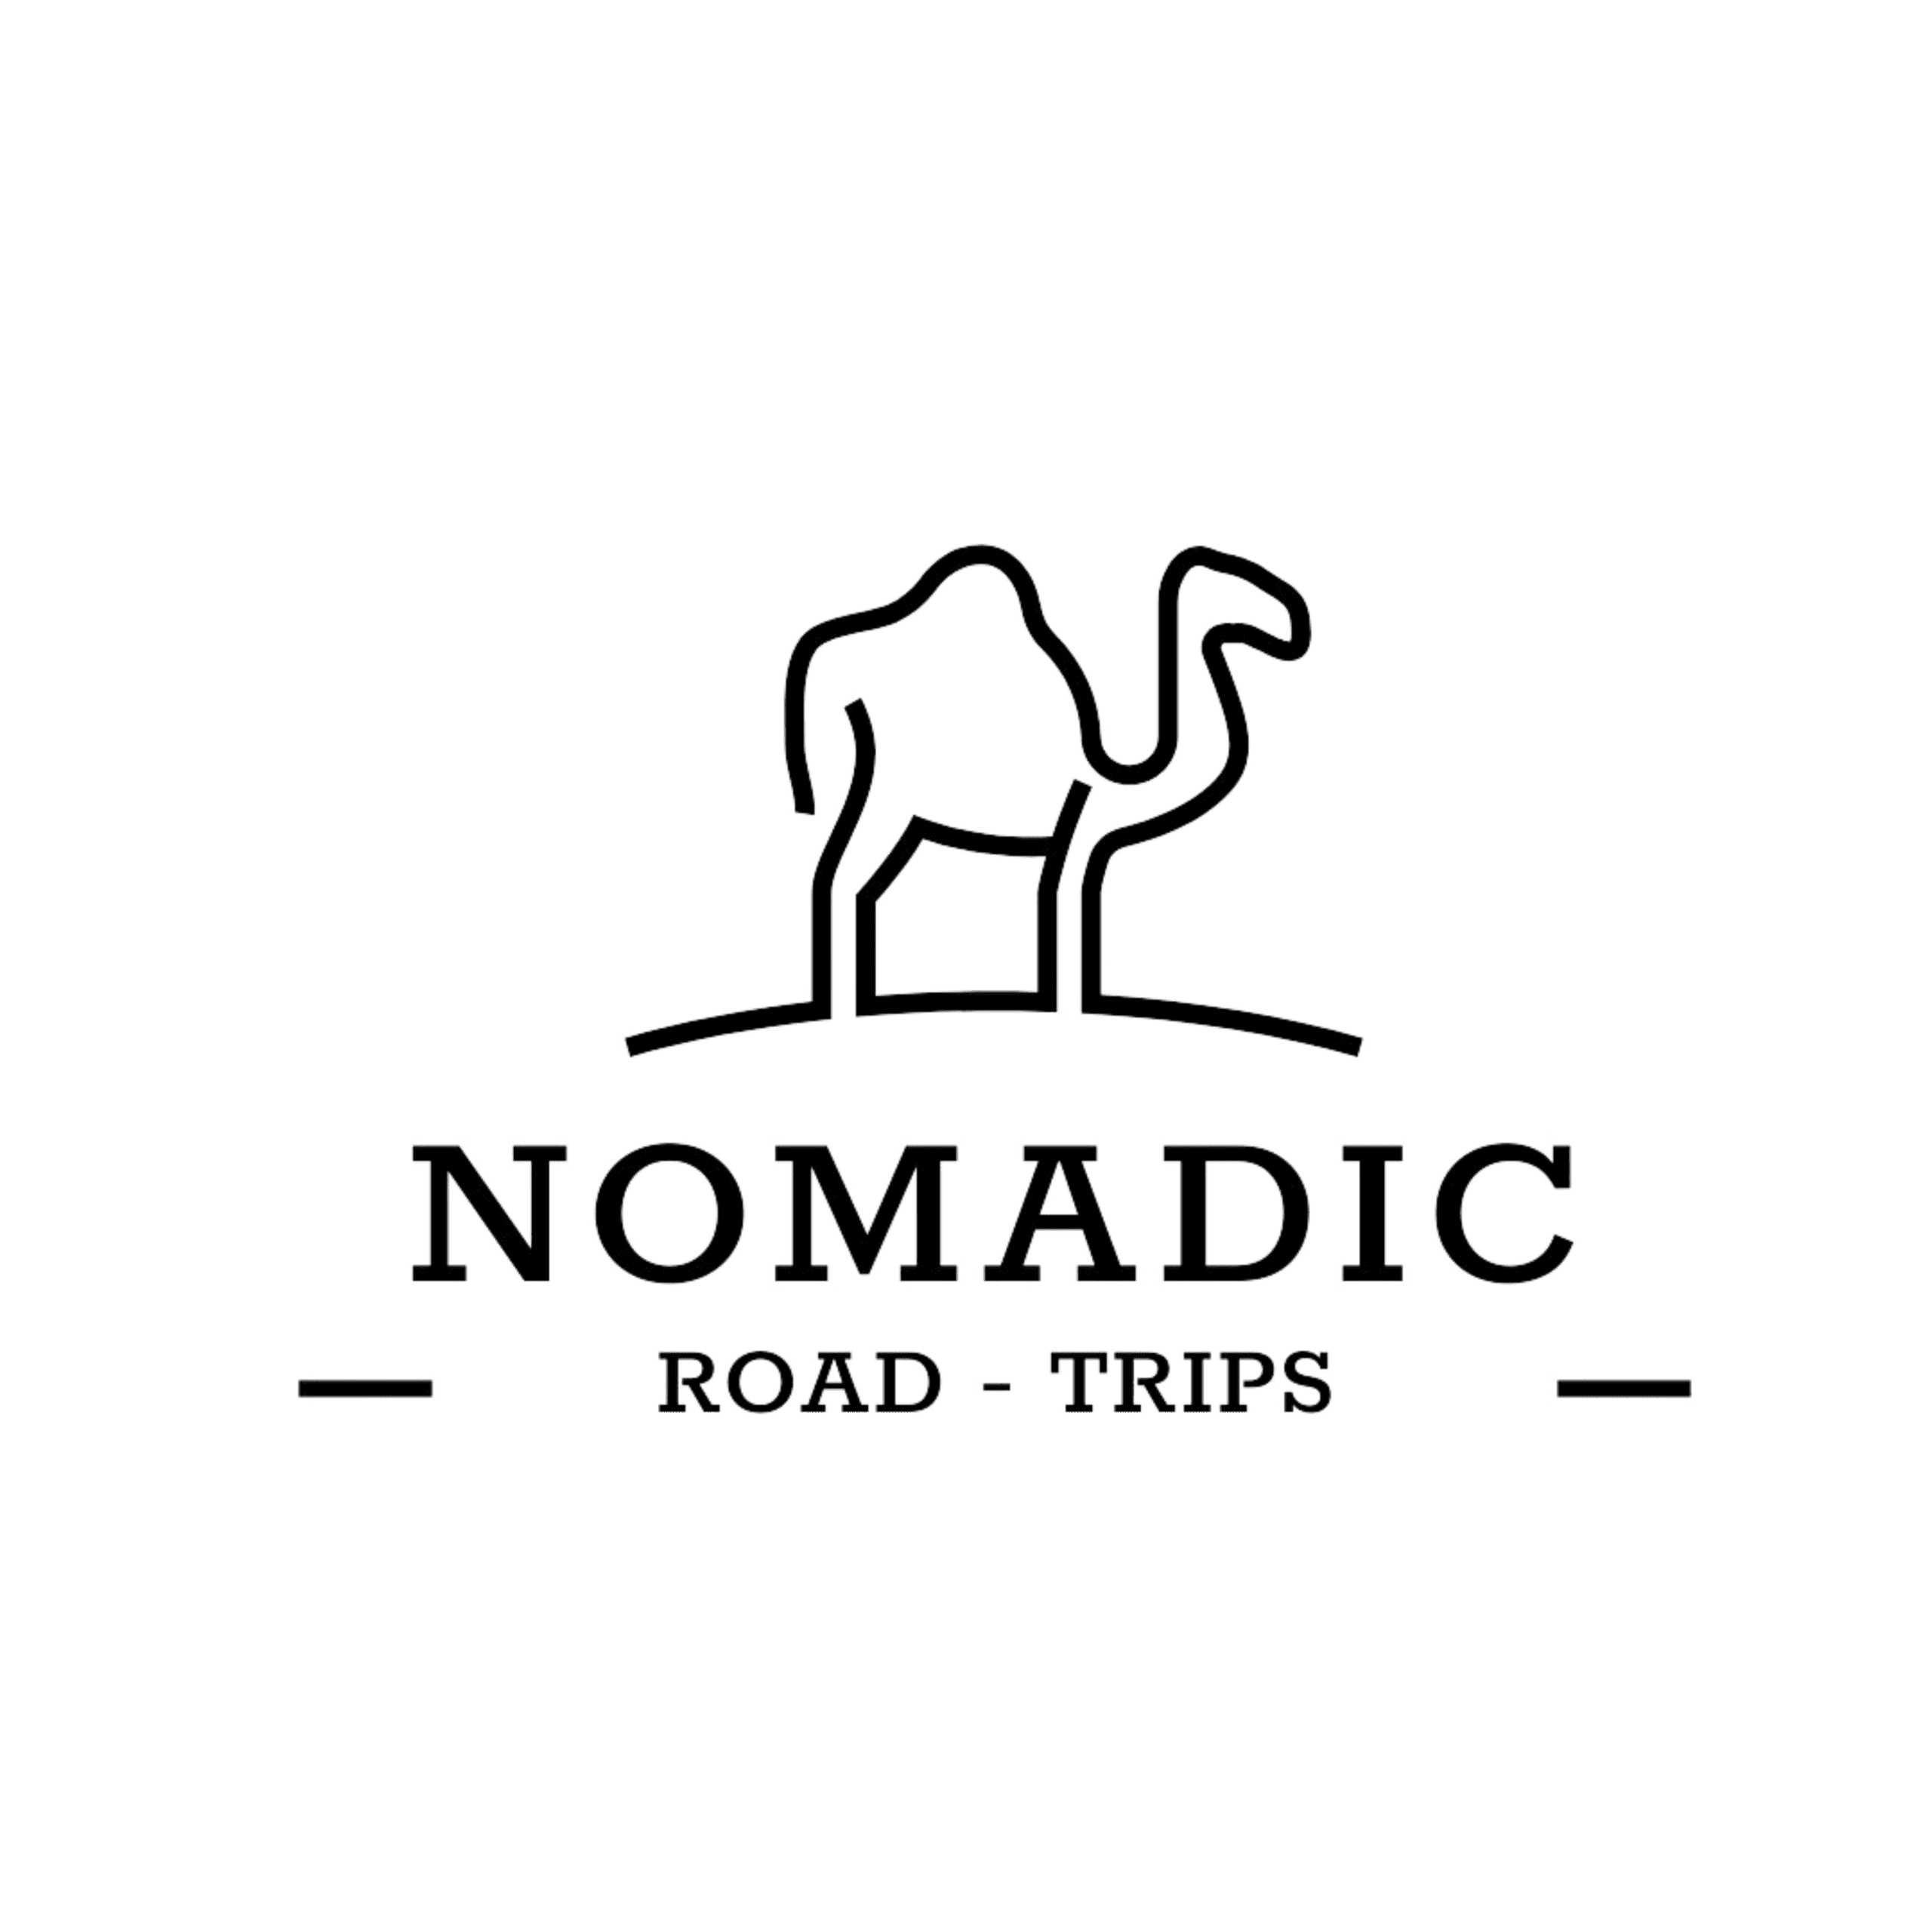 Welcome to World Nomadic Road Trips is your gateway to the boundless beauty of Morocco. home and learn how to live nomadic. Discover practical tips, compelling stories and the essence of the nomadic lifestyle. From off-grid camping to embracing remote destinations, on a journey where every nomadic road trip becomes an unforgettable experience. Join us in celebrating the joy of endless exploration with a friendly touch. Your guide to nomadic travel starts here! Your is Home